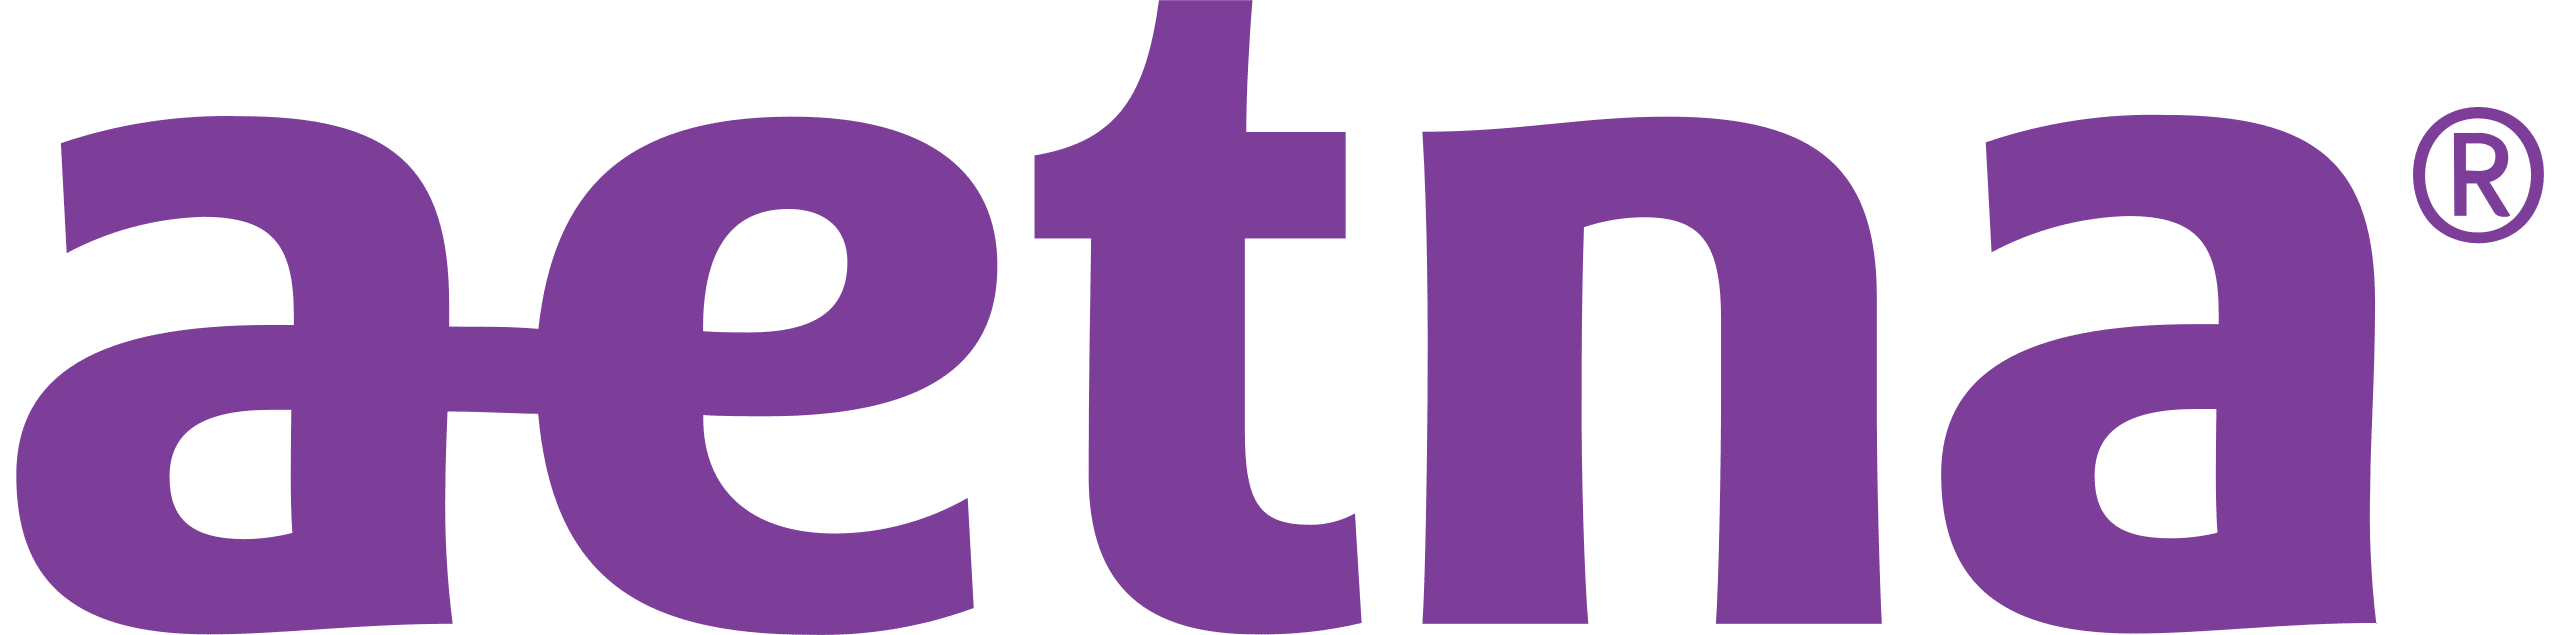 Aetna logo.svg Home Page